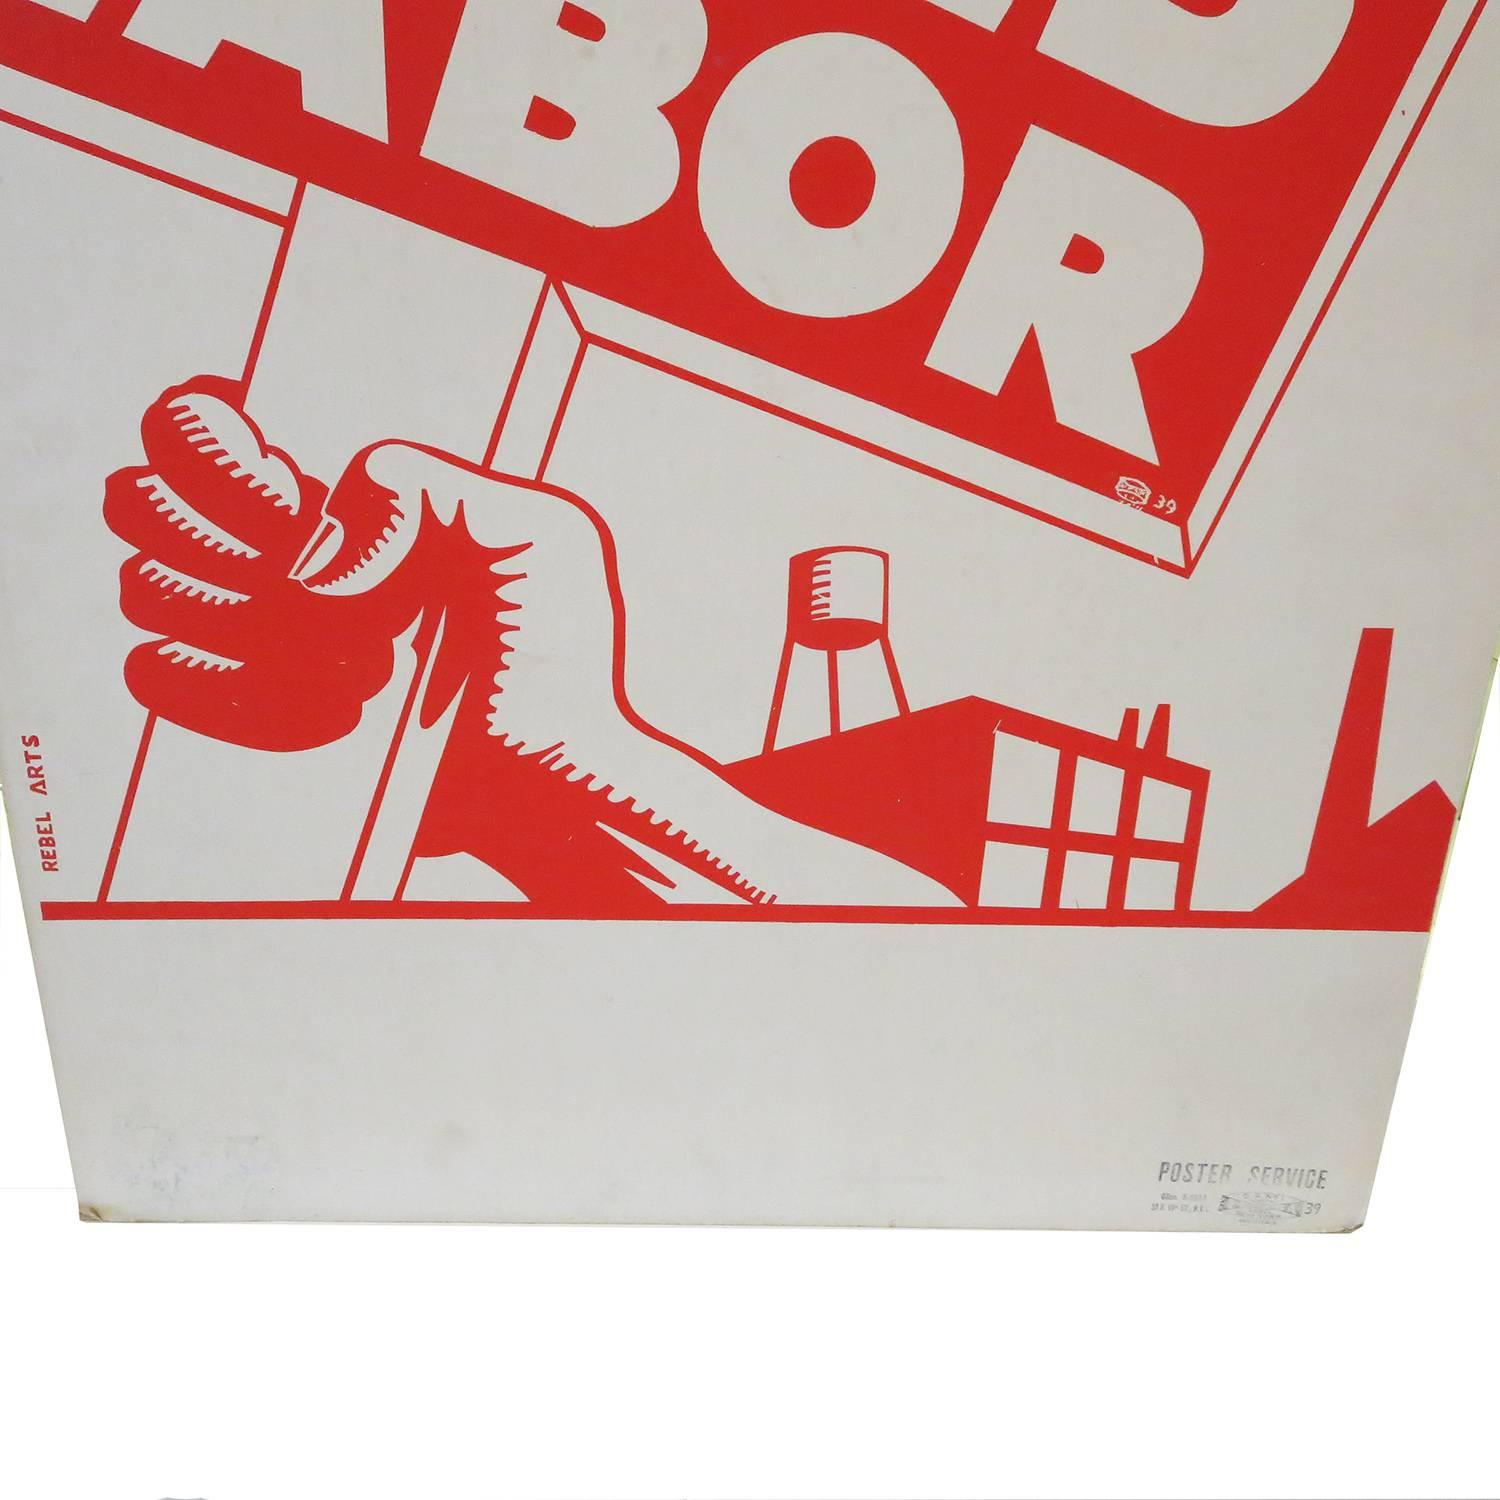 Art Deco 1939 Socialist Child Labor Poster by Rebel Arts Group, New York